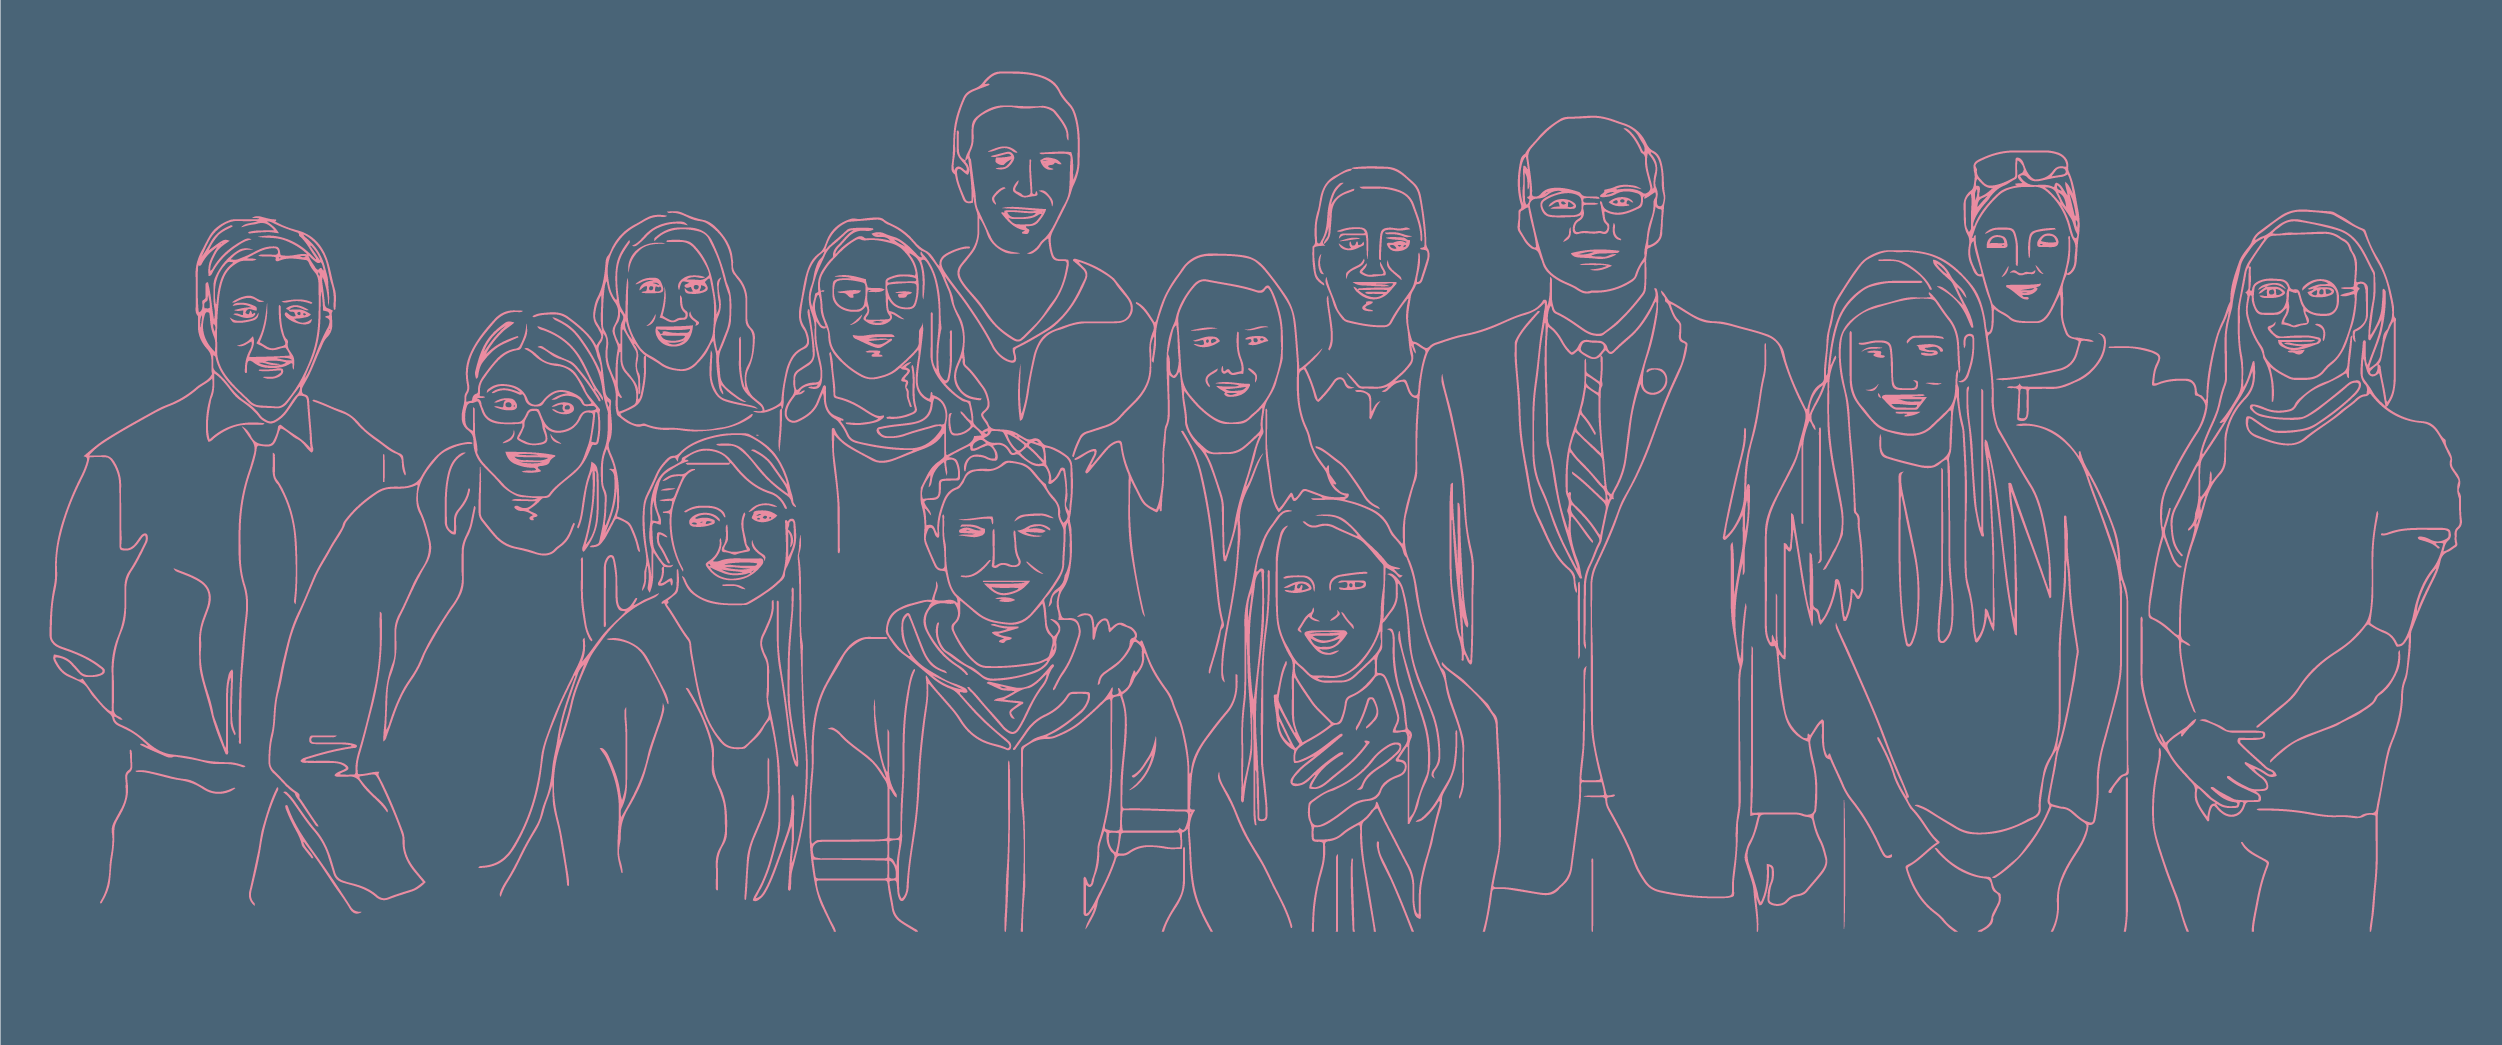 A line drawing of FFPAC members posing with Jerry Mande, Dariush Mozaffarian, and State Rep. Jim McGovern